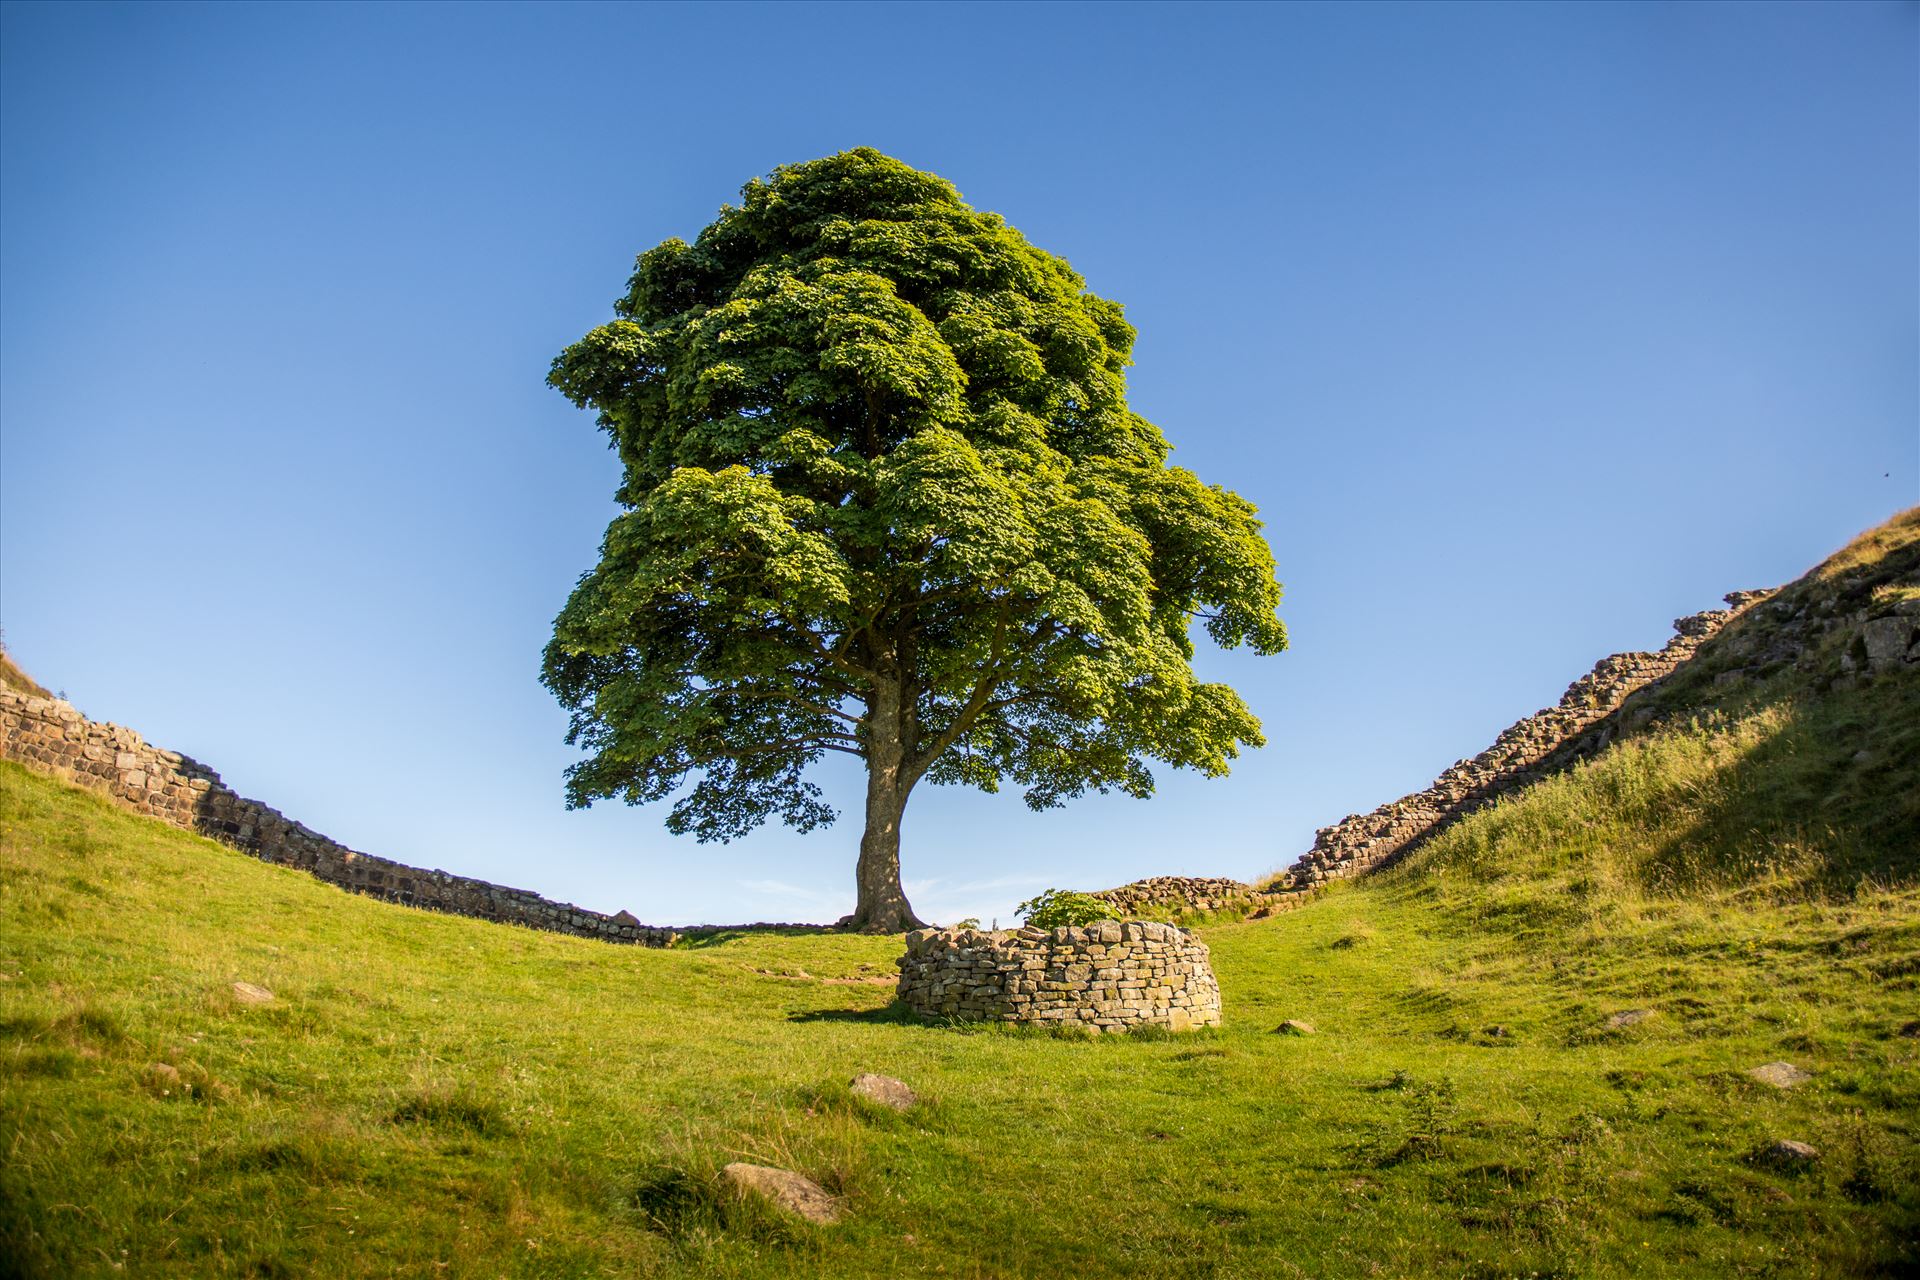 Sycamore Gap - Sycamore Gap sits on the Roman Wall near the fort of Housesteads. It was made famous by the film Robin Hood: Prince of Thieves by philreay